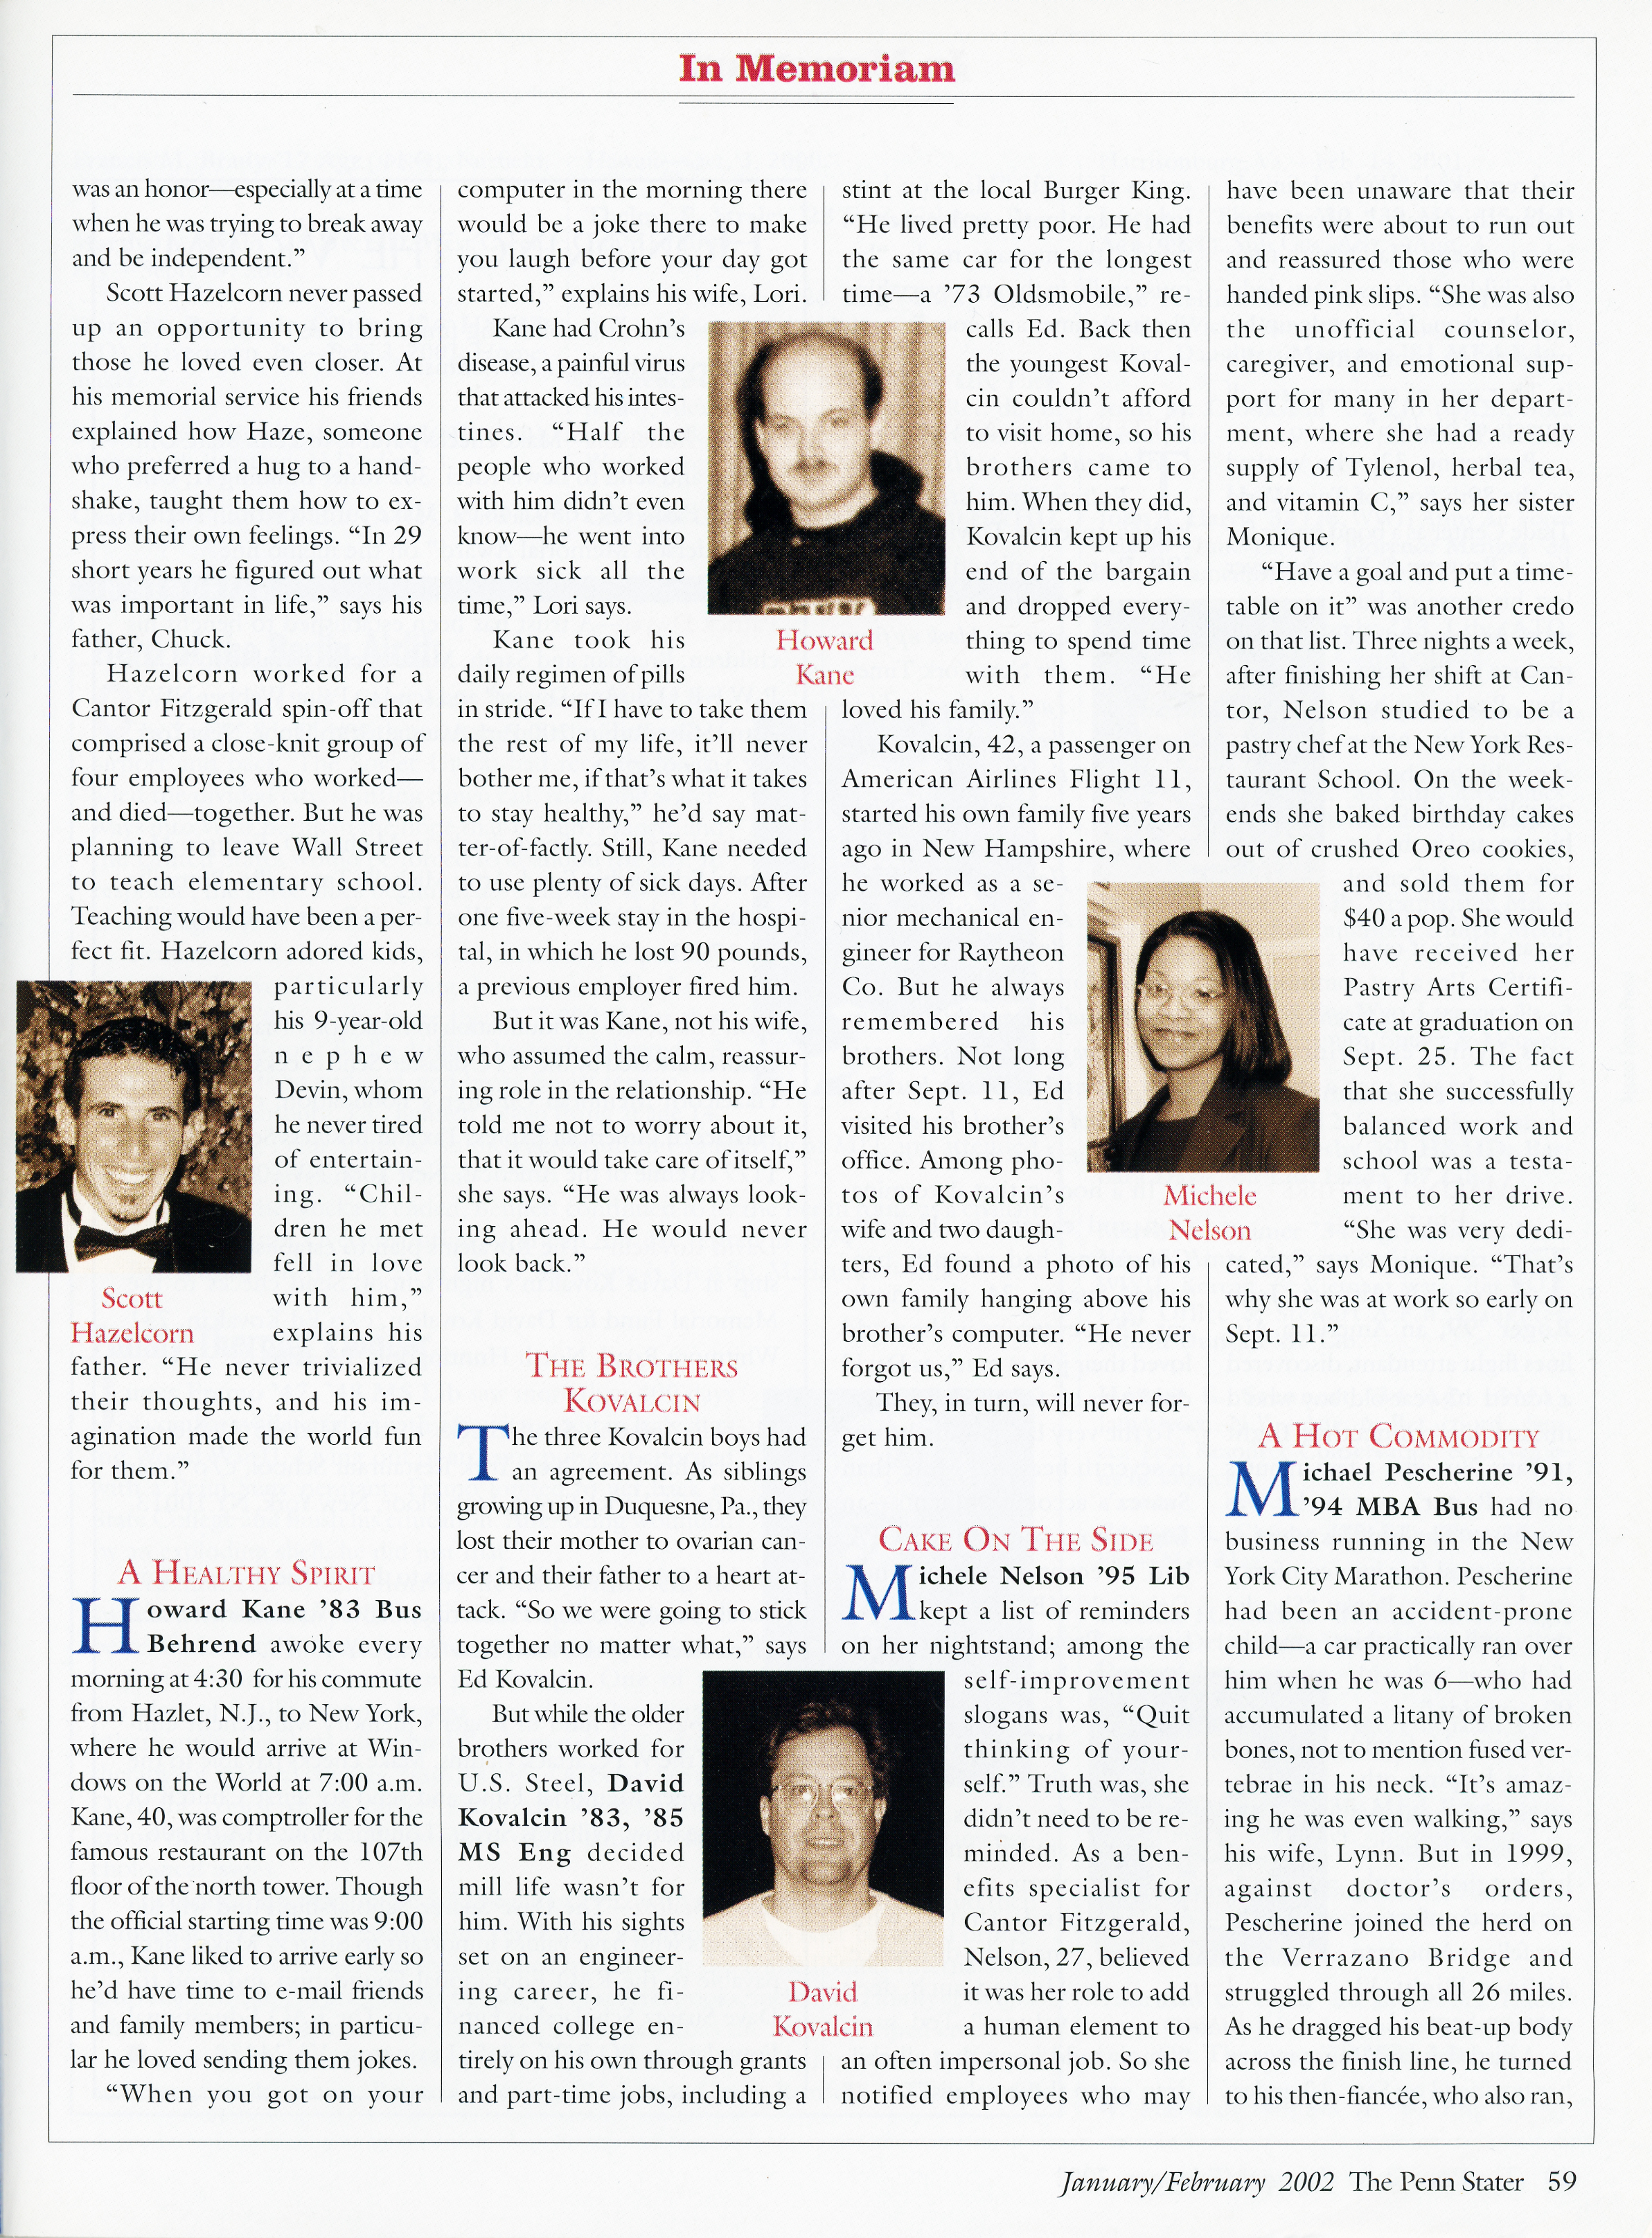 Second of three pages of obituary profiles of Penn State alumni who died on Sept. 11, 2001.